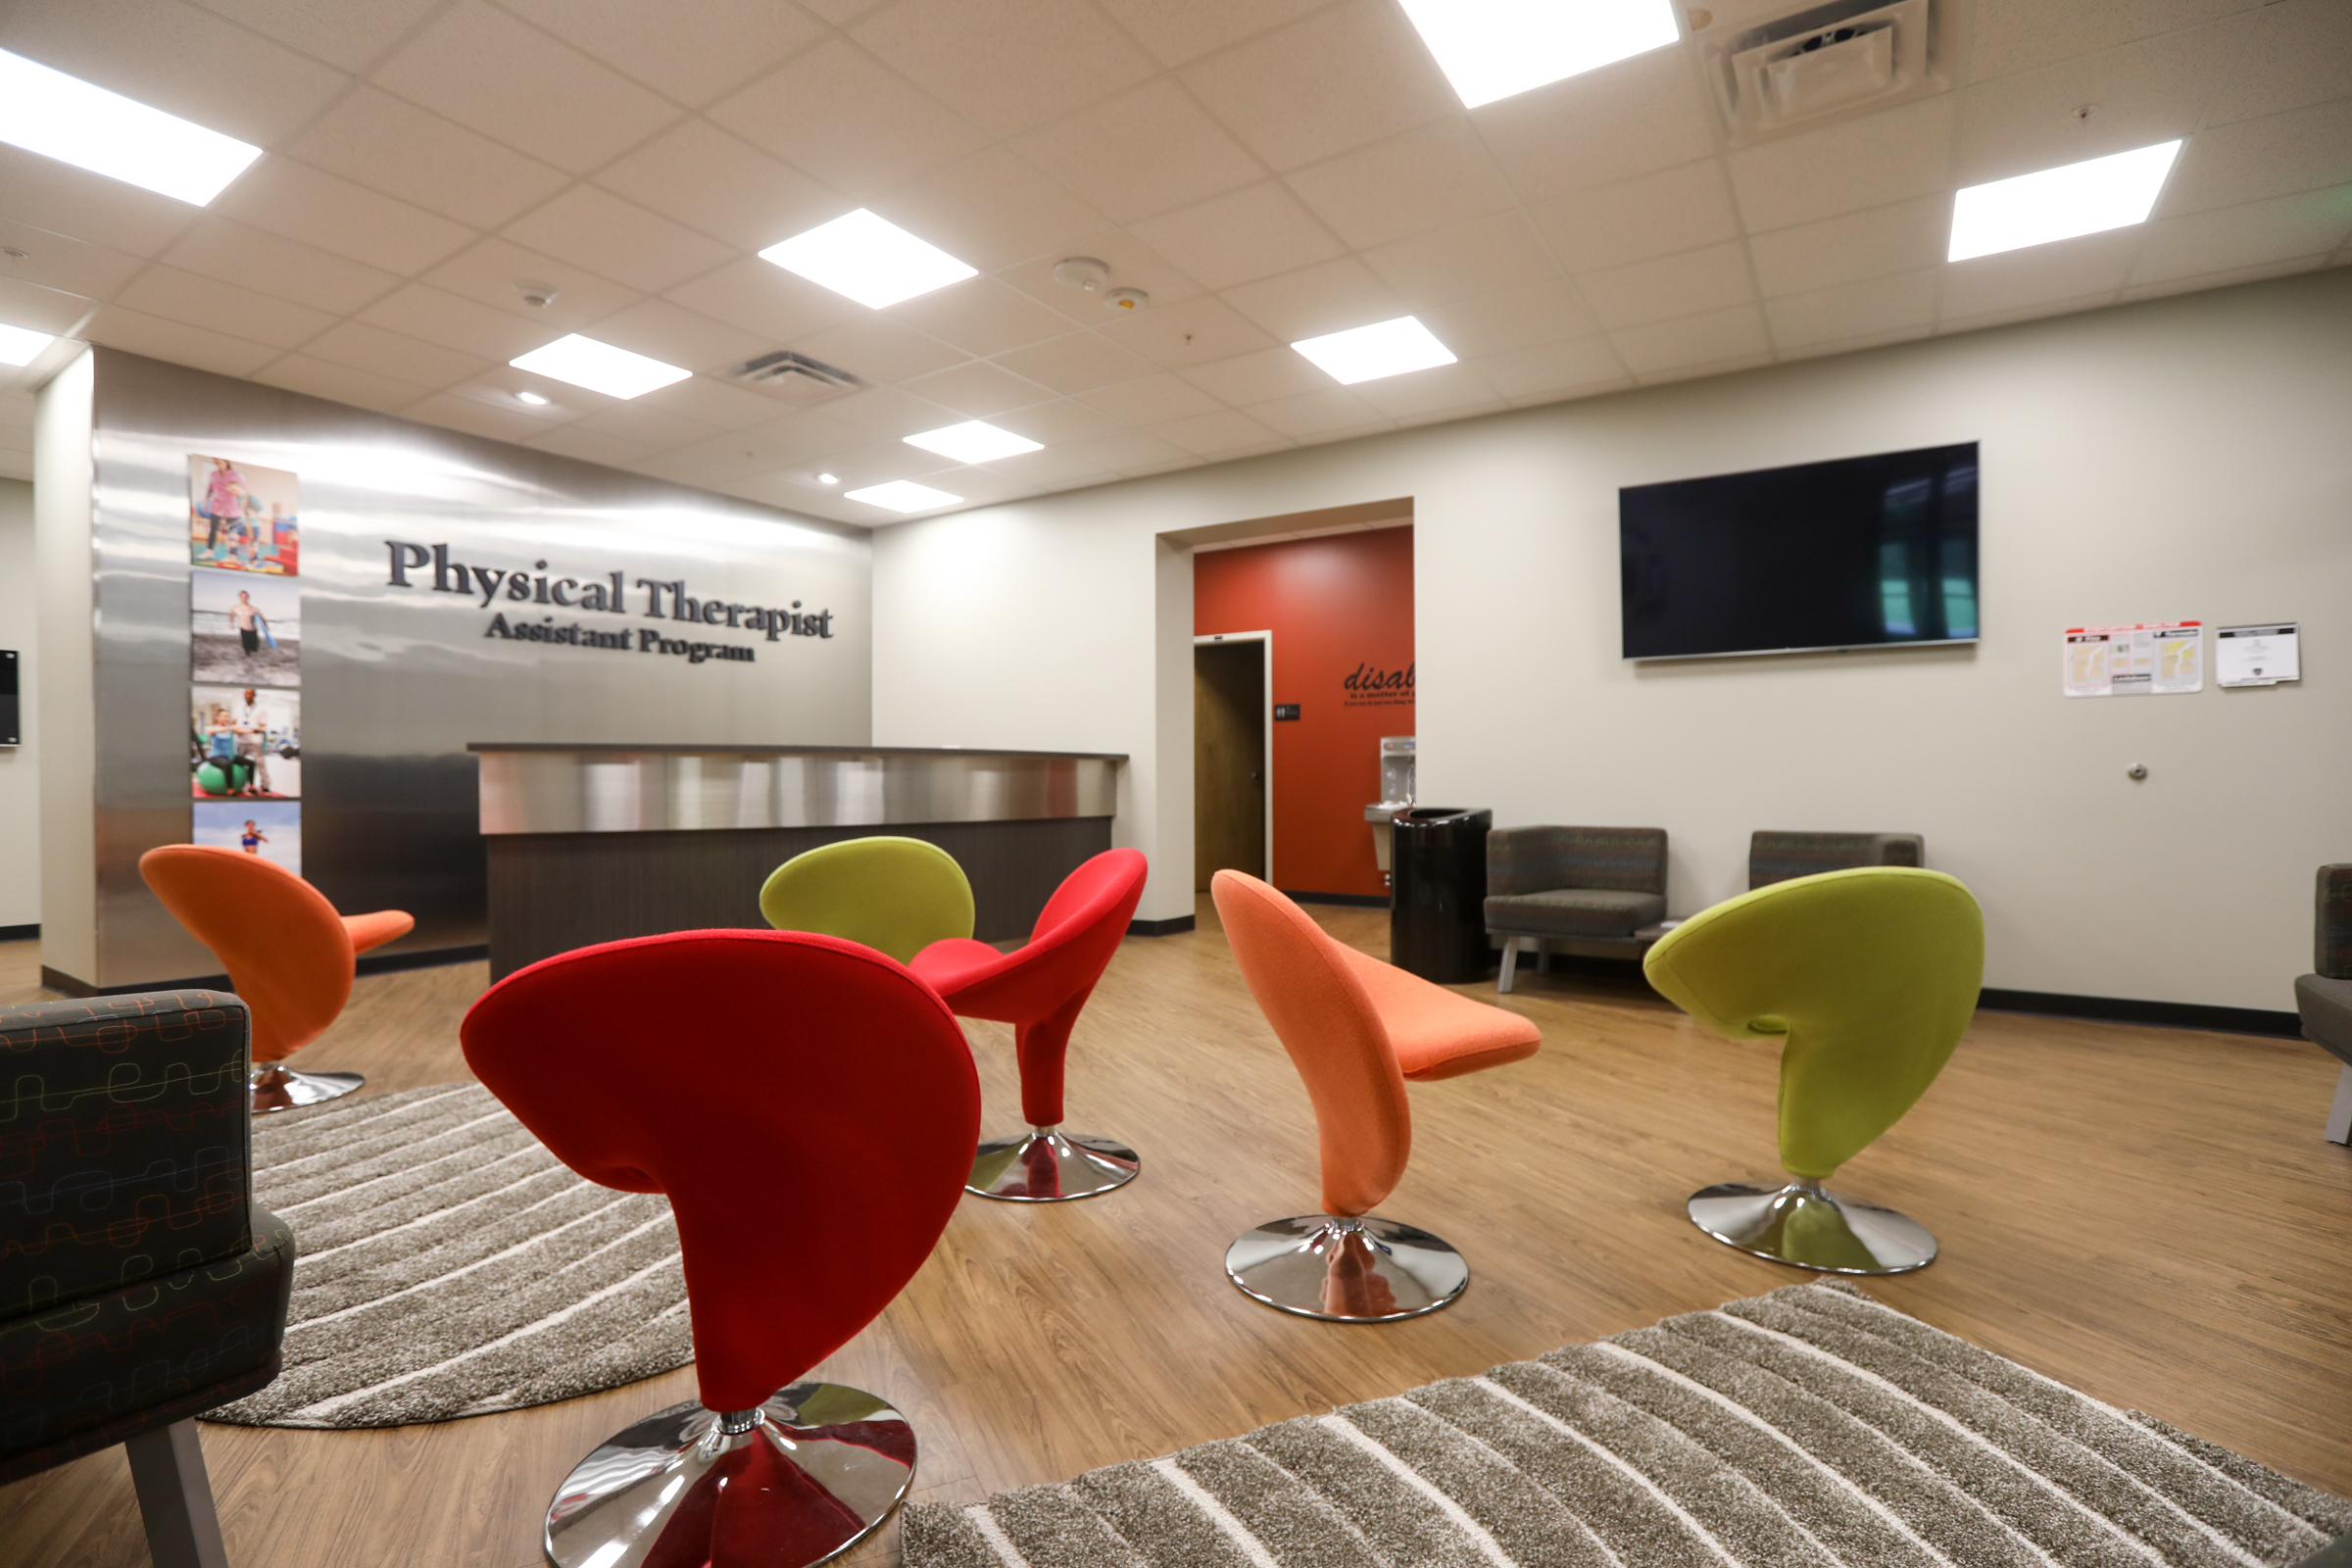 Physical Therapist Assistant Program lobby